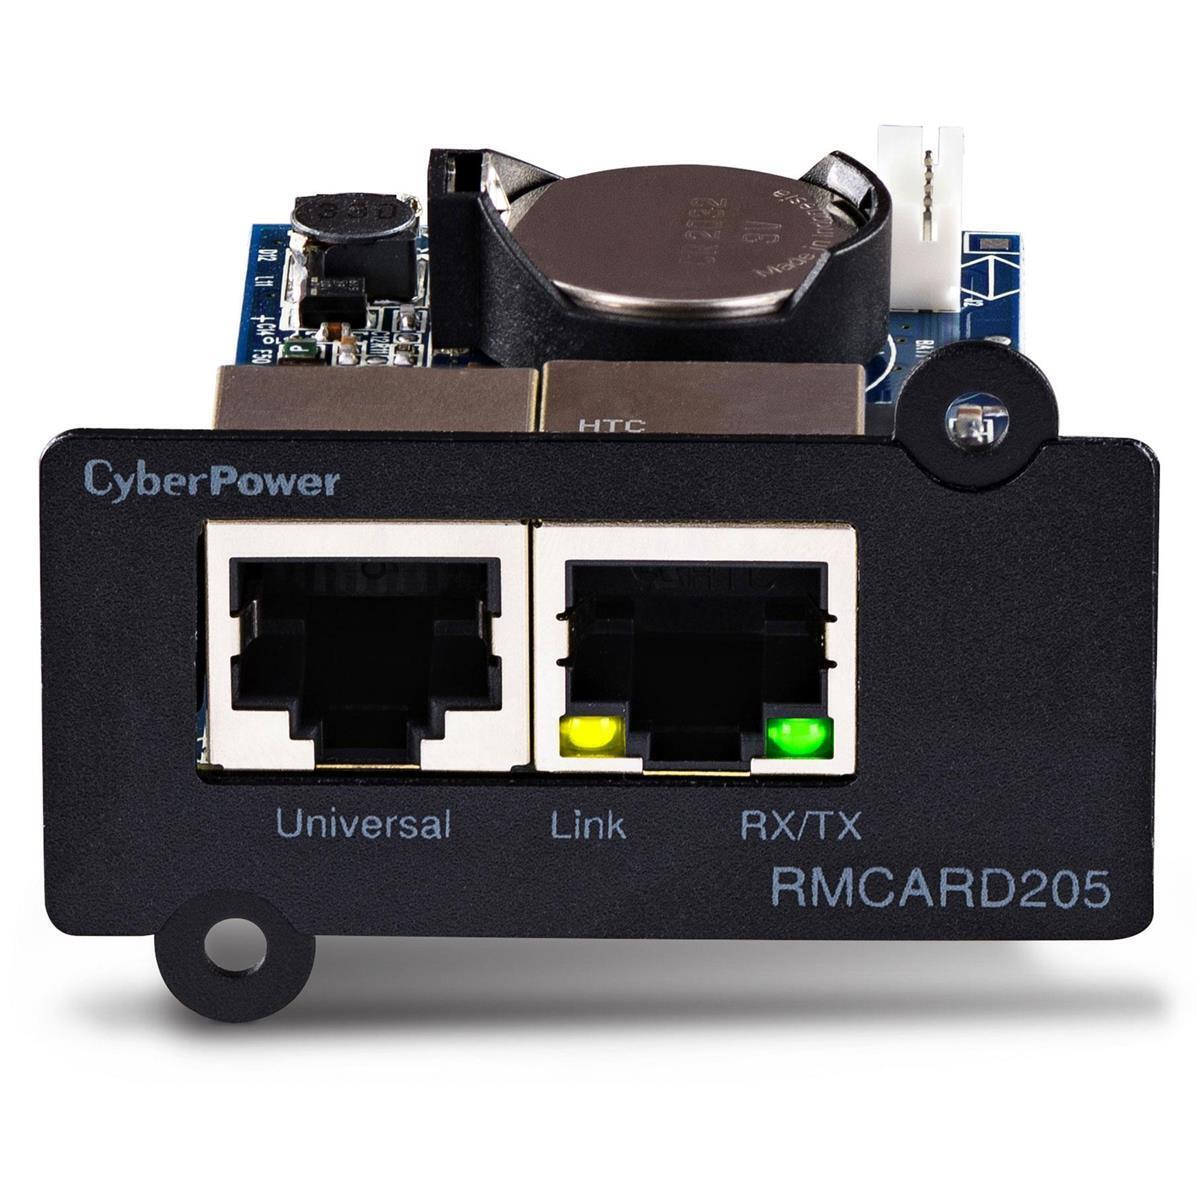 CyberPower RMCARD205 Remote Monitoring  Management Card